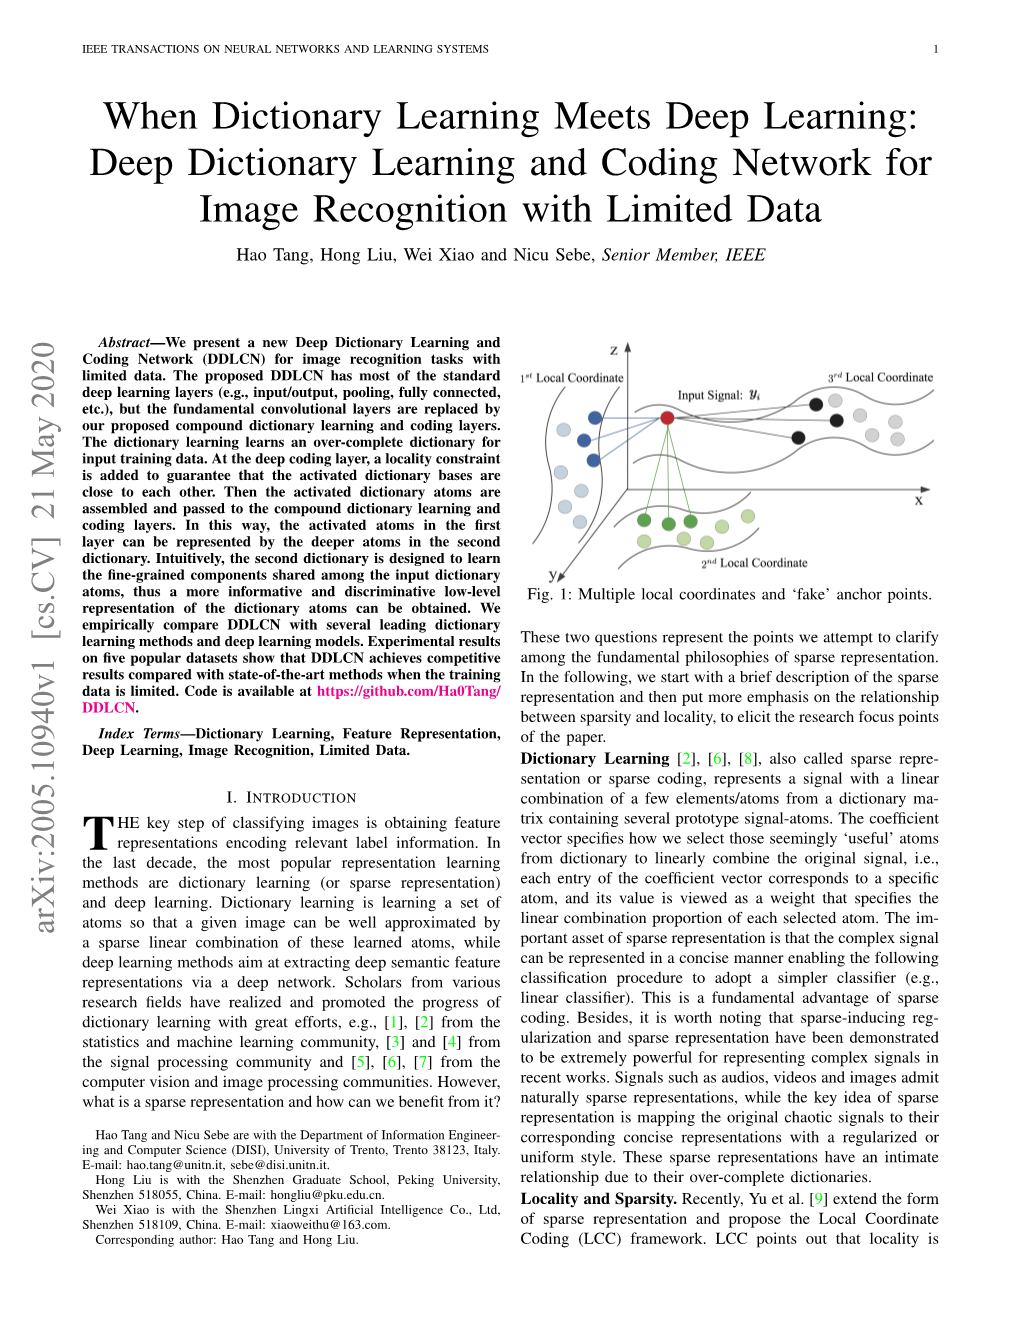 Deep Dictionary Learning and Coding Network for Image Recognition with Limited Data Hao Tang, Hong Liu, Wei Xiao and Nicu Sebe, Senior Member, IEEE